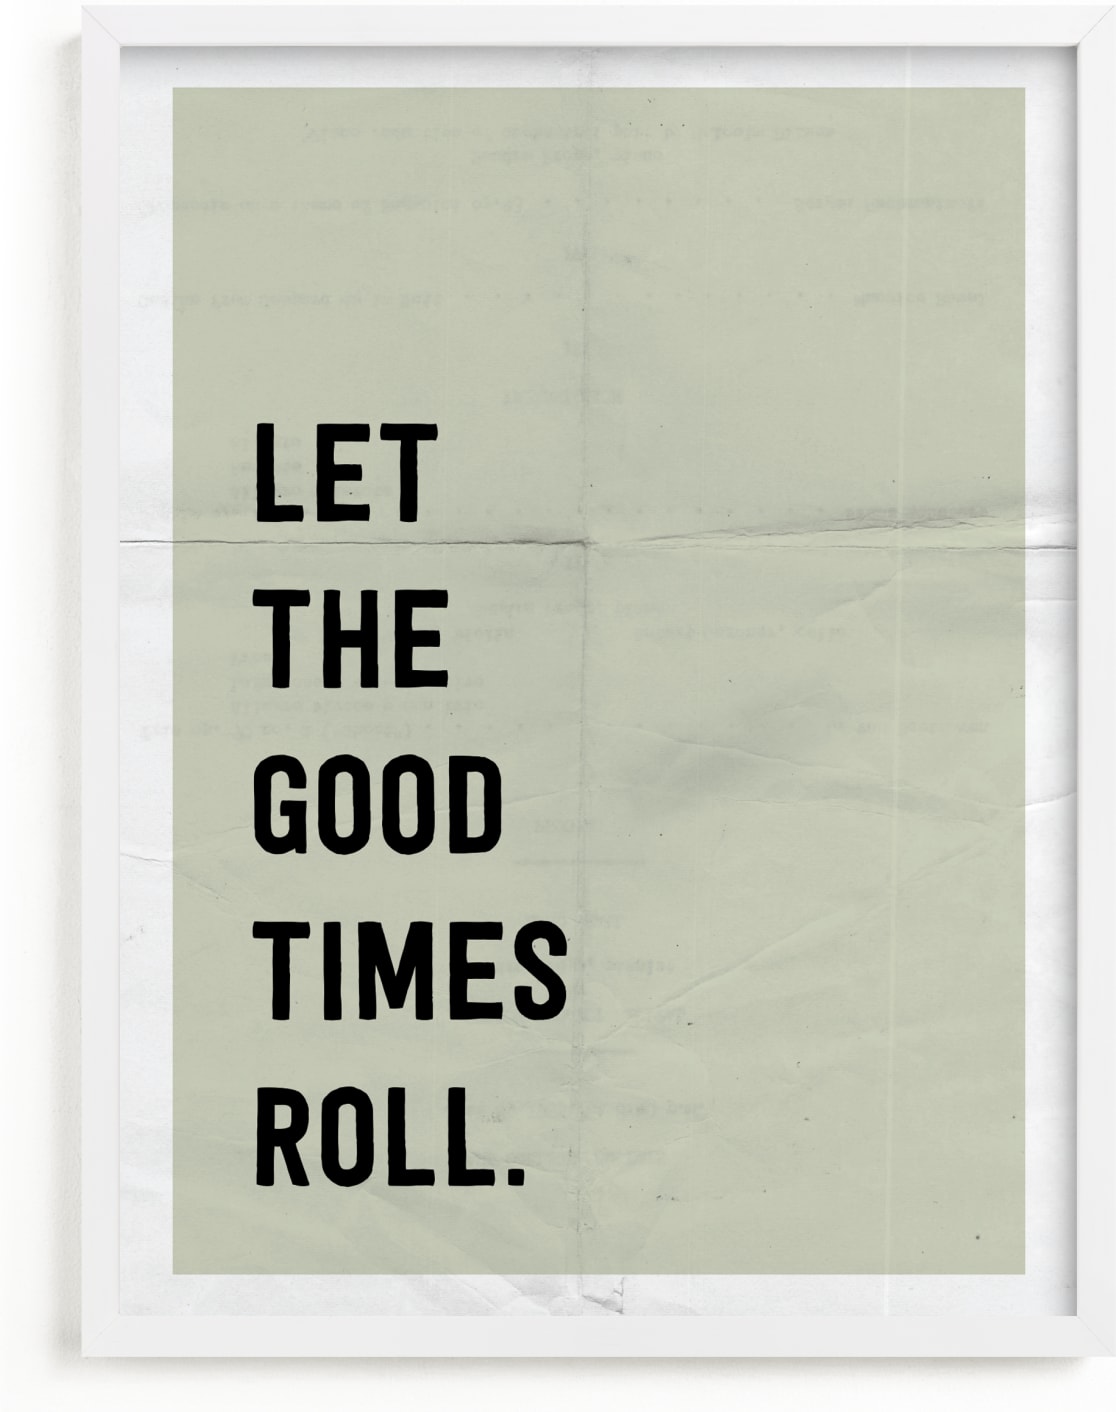 This is a white art by Morgan Kendall called Let the Good Times Roll.